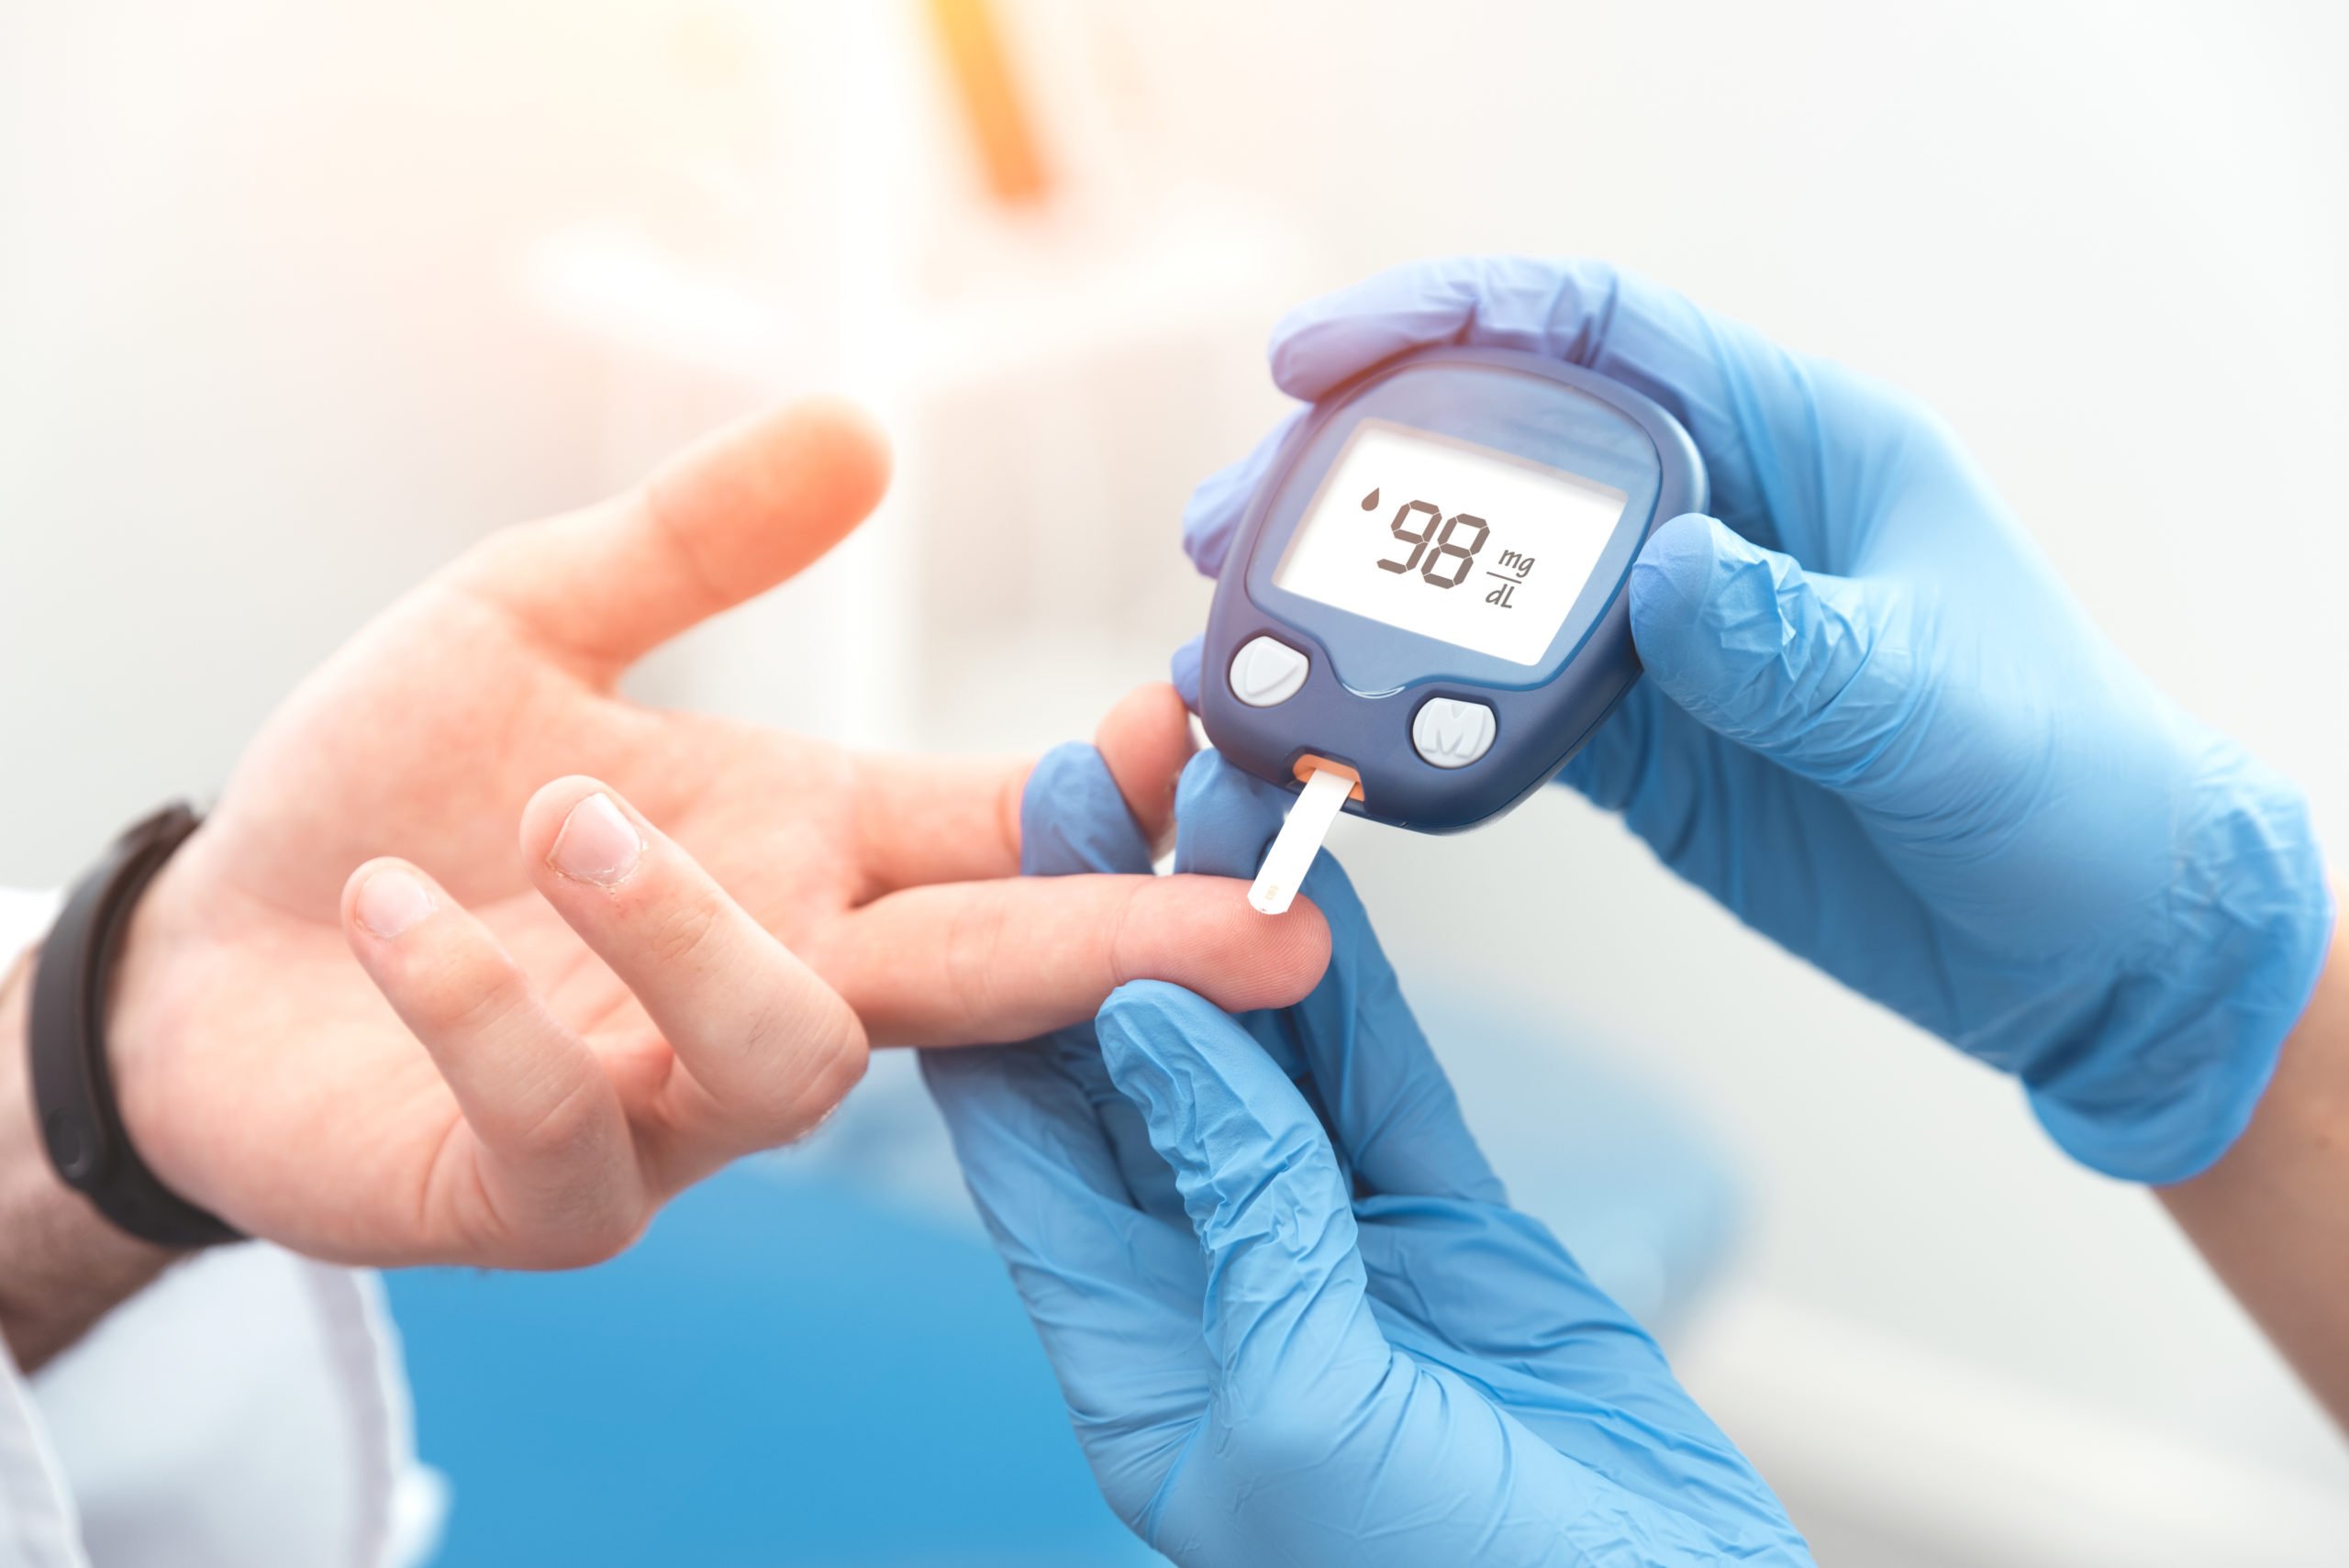 How to test your blood sugar level?